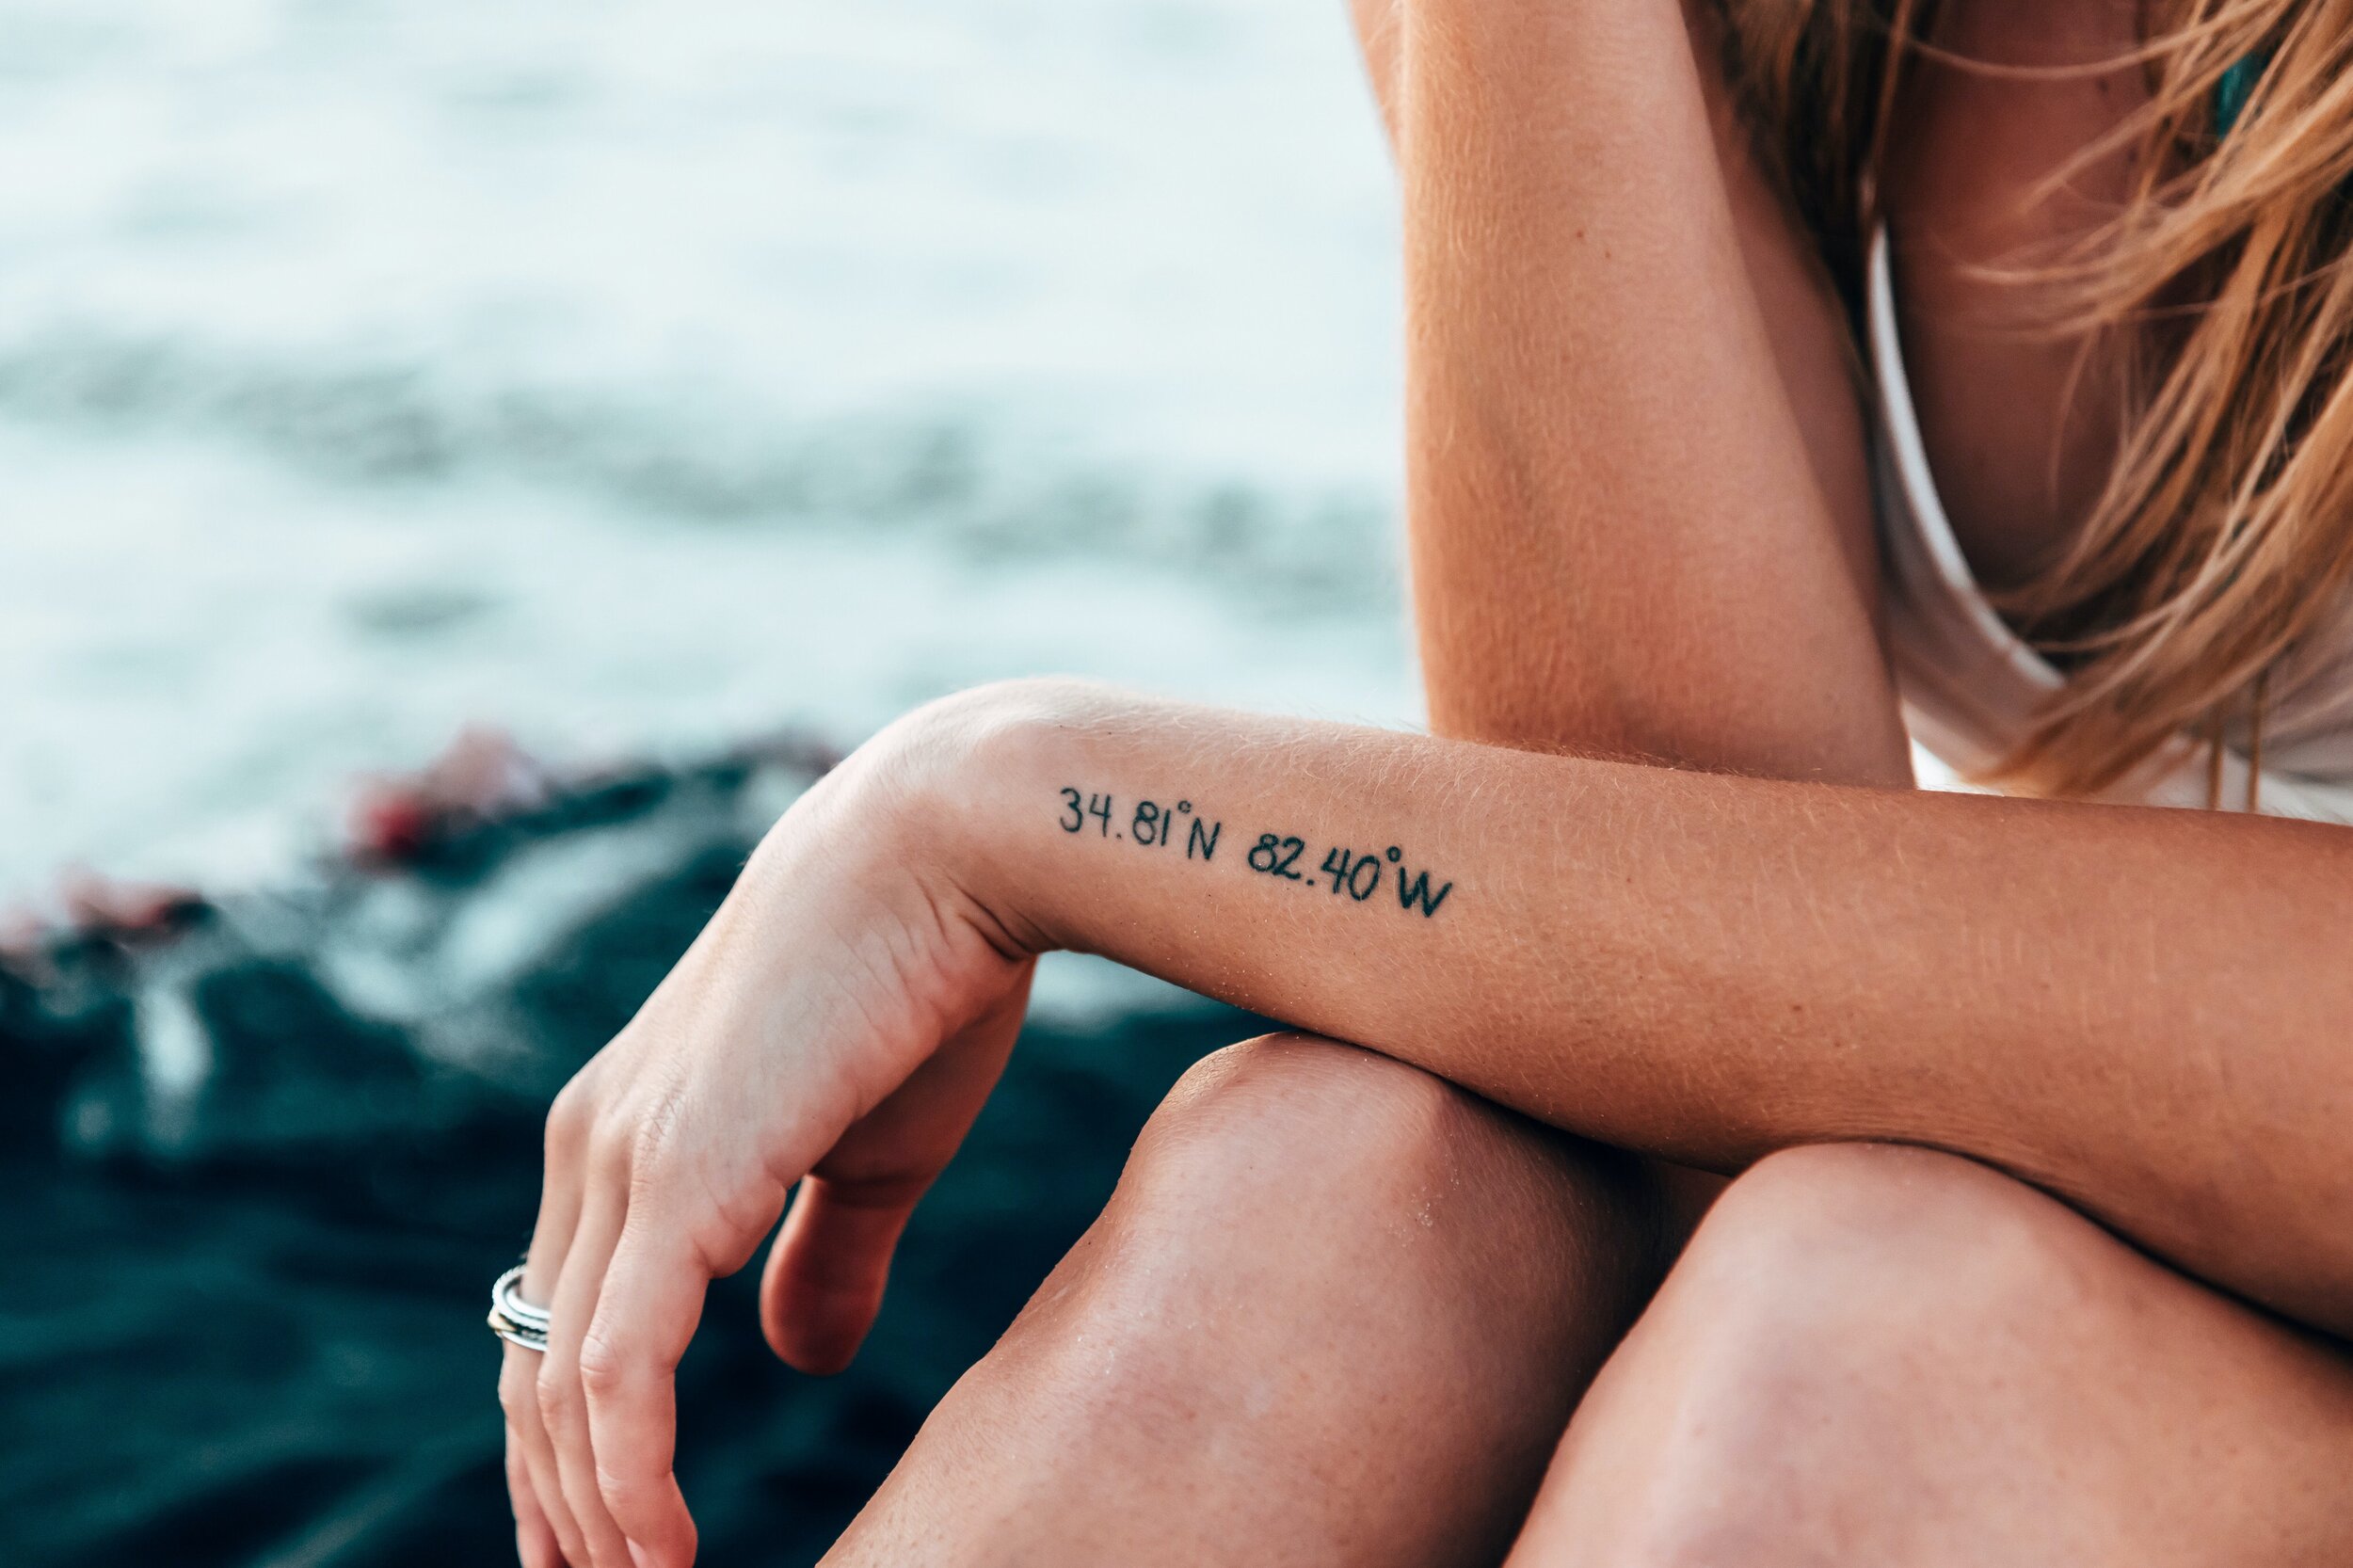 1001 Inspired Travel Tattoo Ideas & What to Expect If You Get a Tattoo  While Traveling - History Fangirl